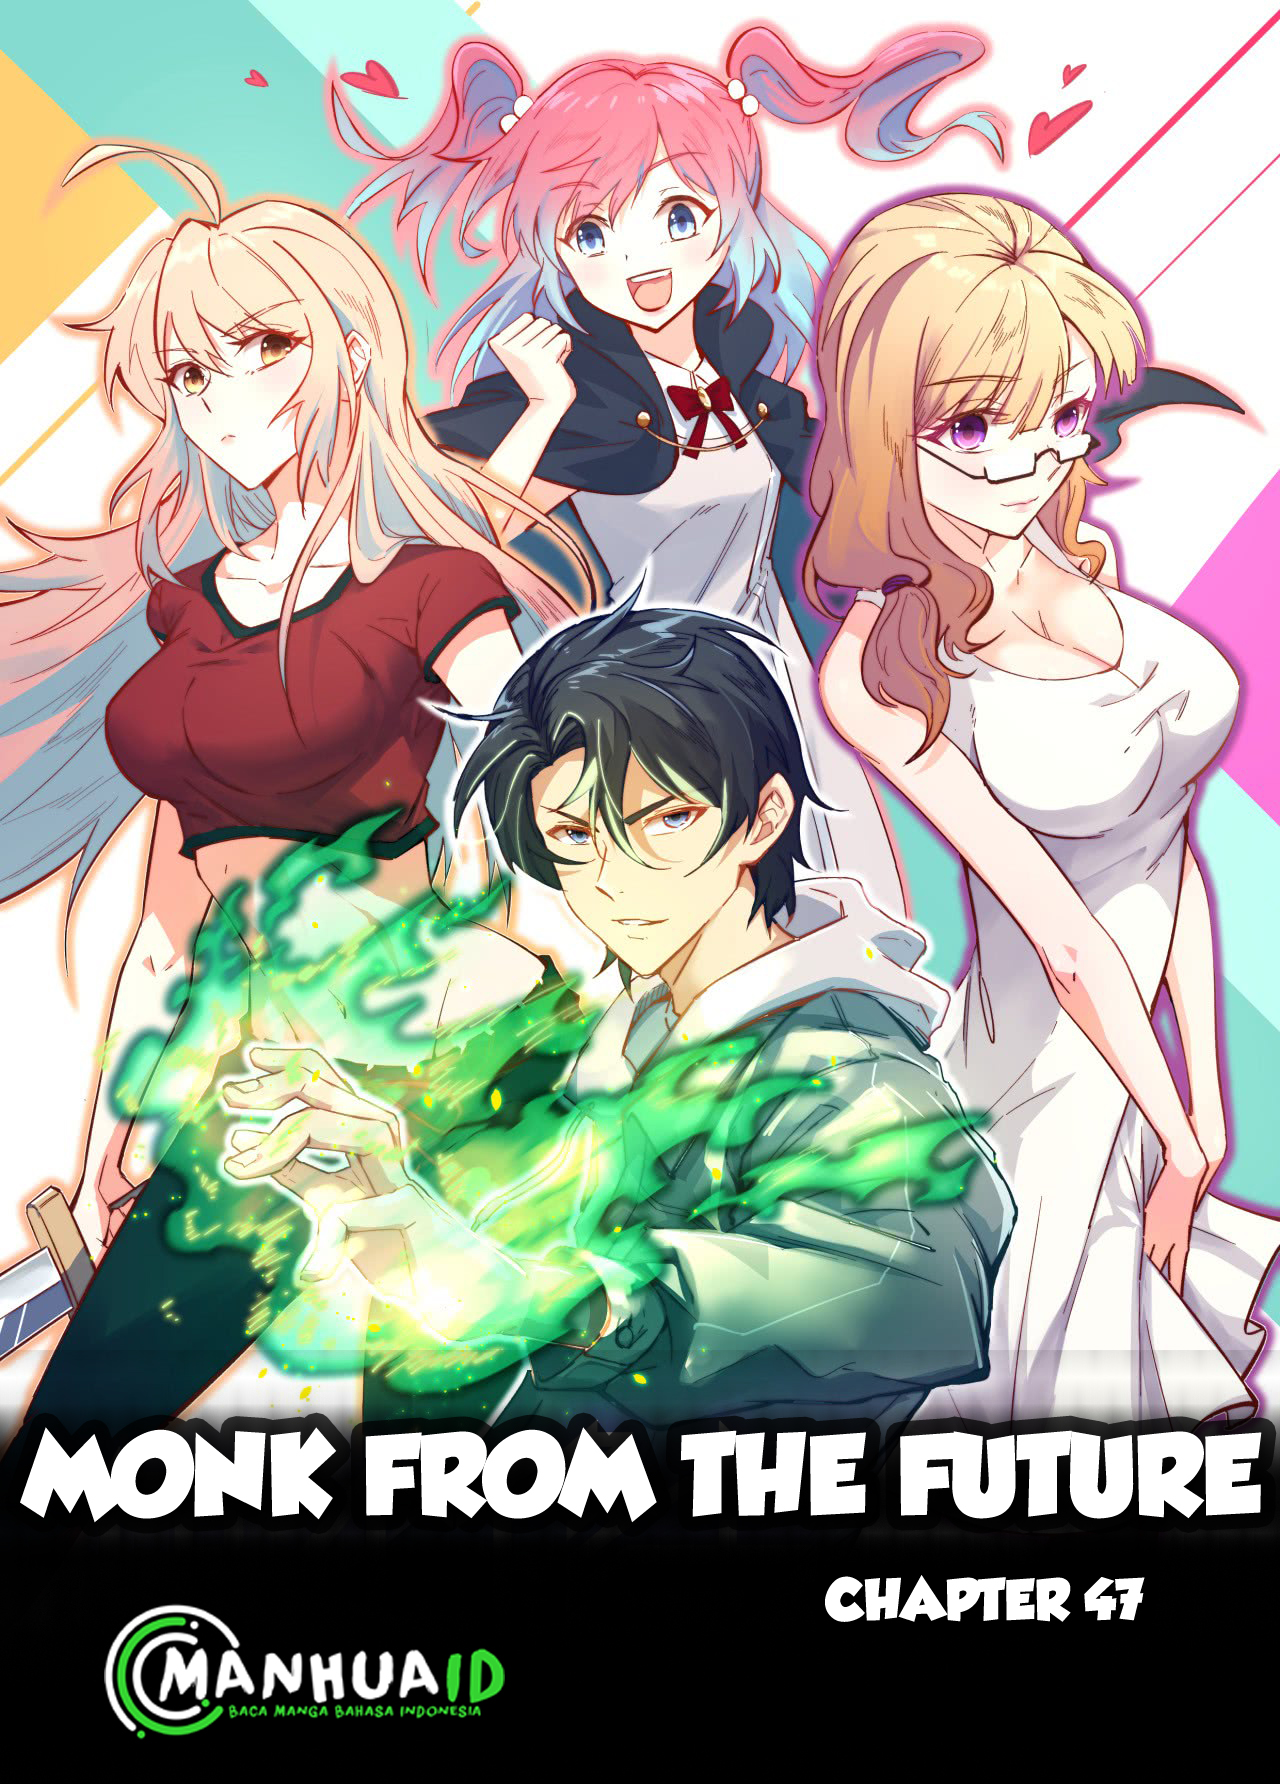 Monk From the Future Chapter 47